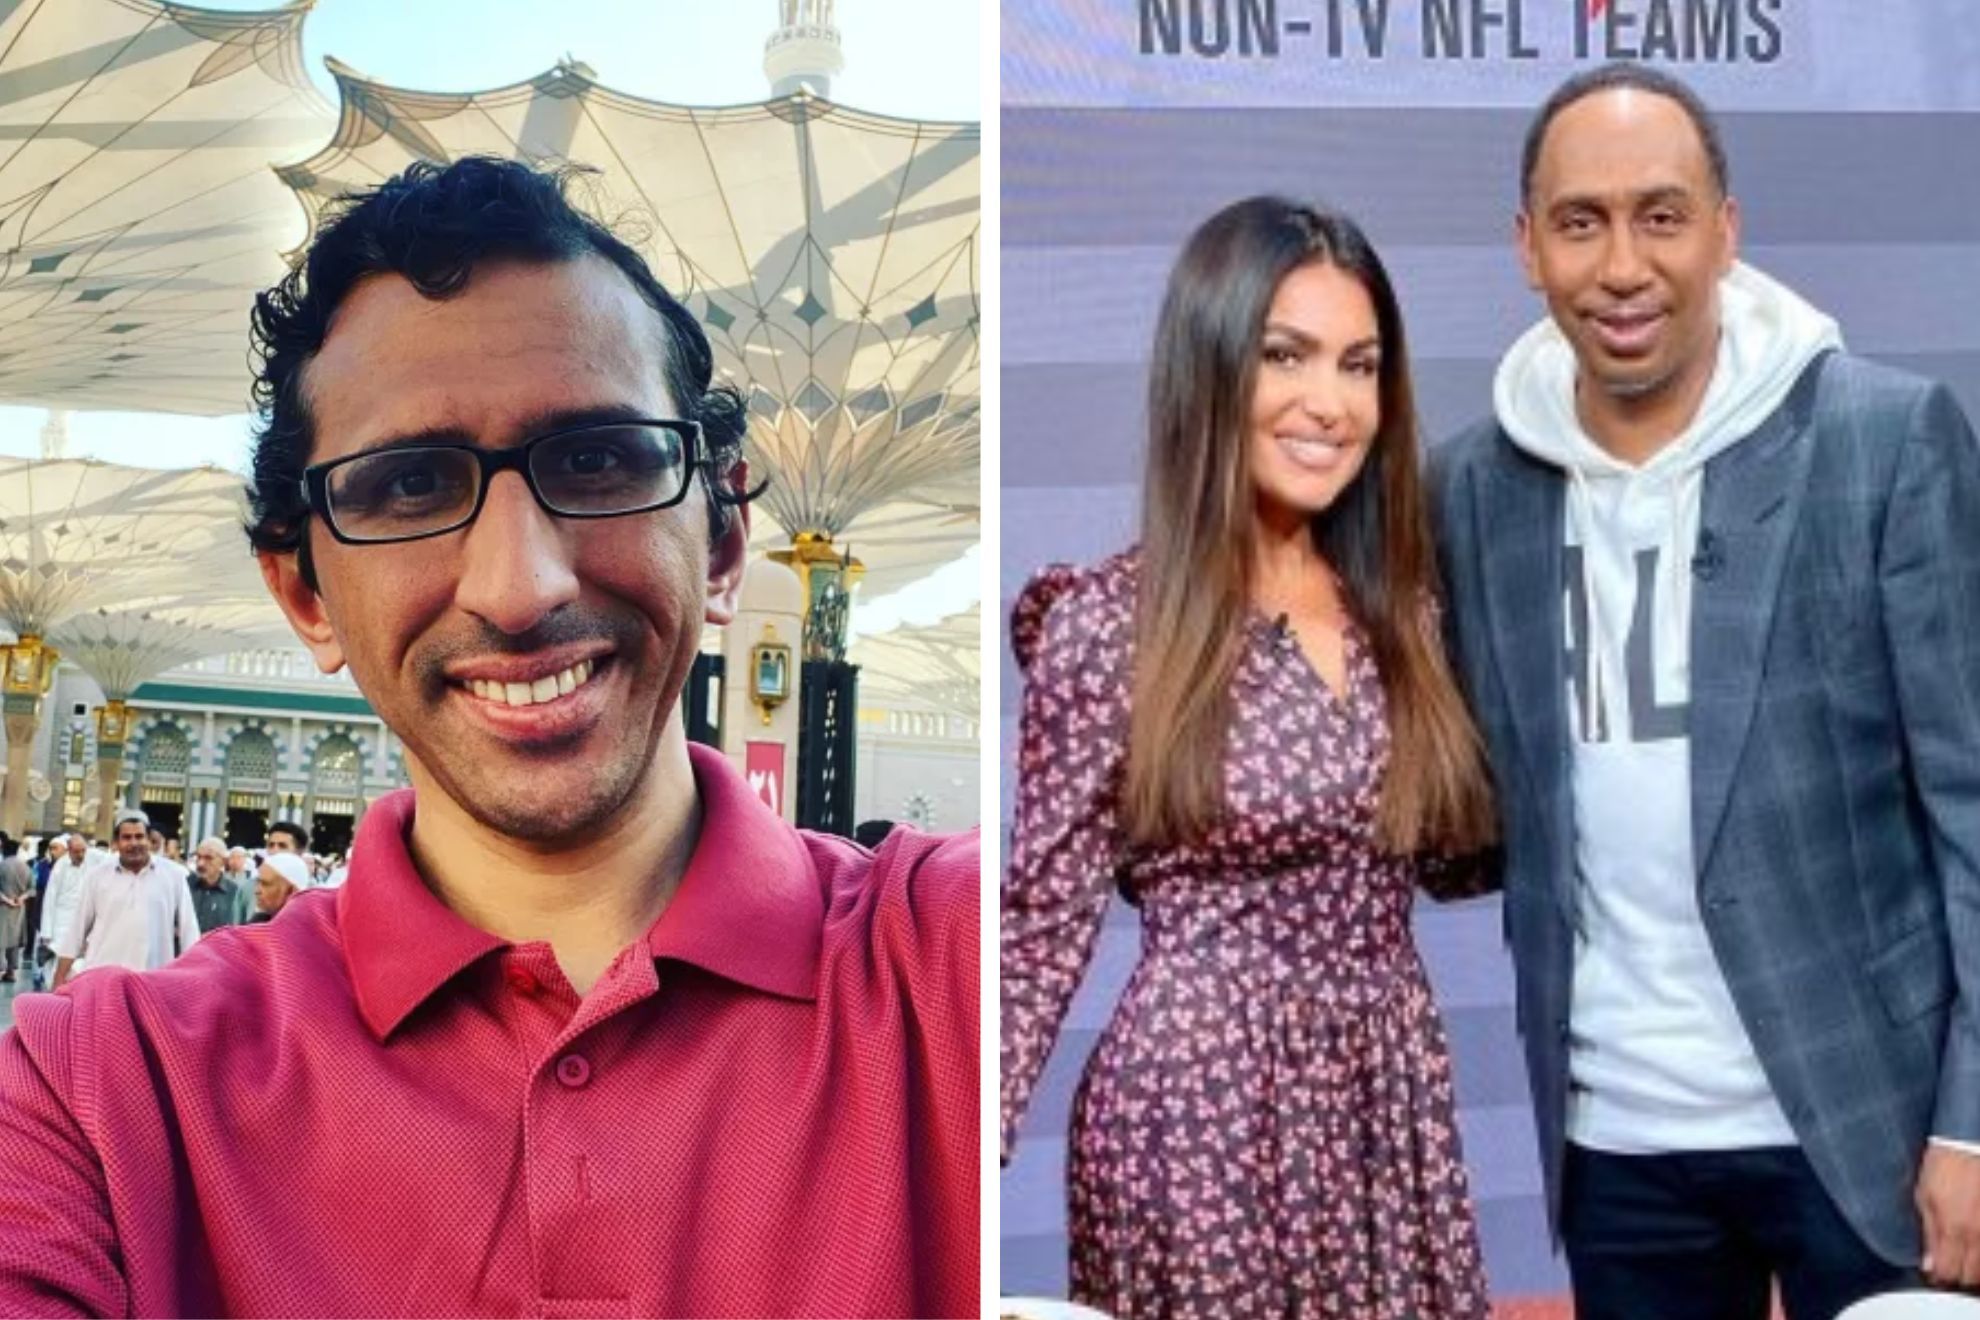 ESPN stalker: Who is tormenting Molly Qerim, Malika Andrews and Stephen A. Smith?